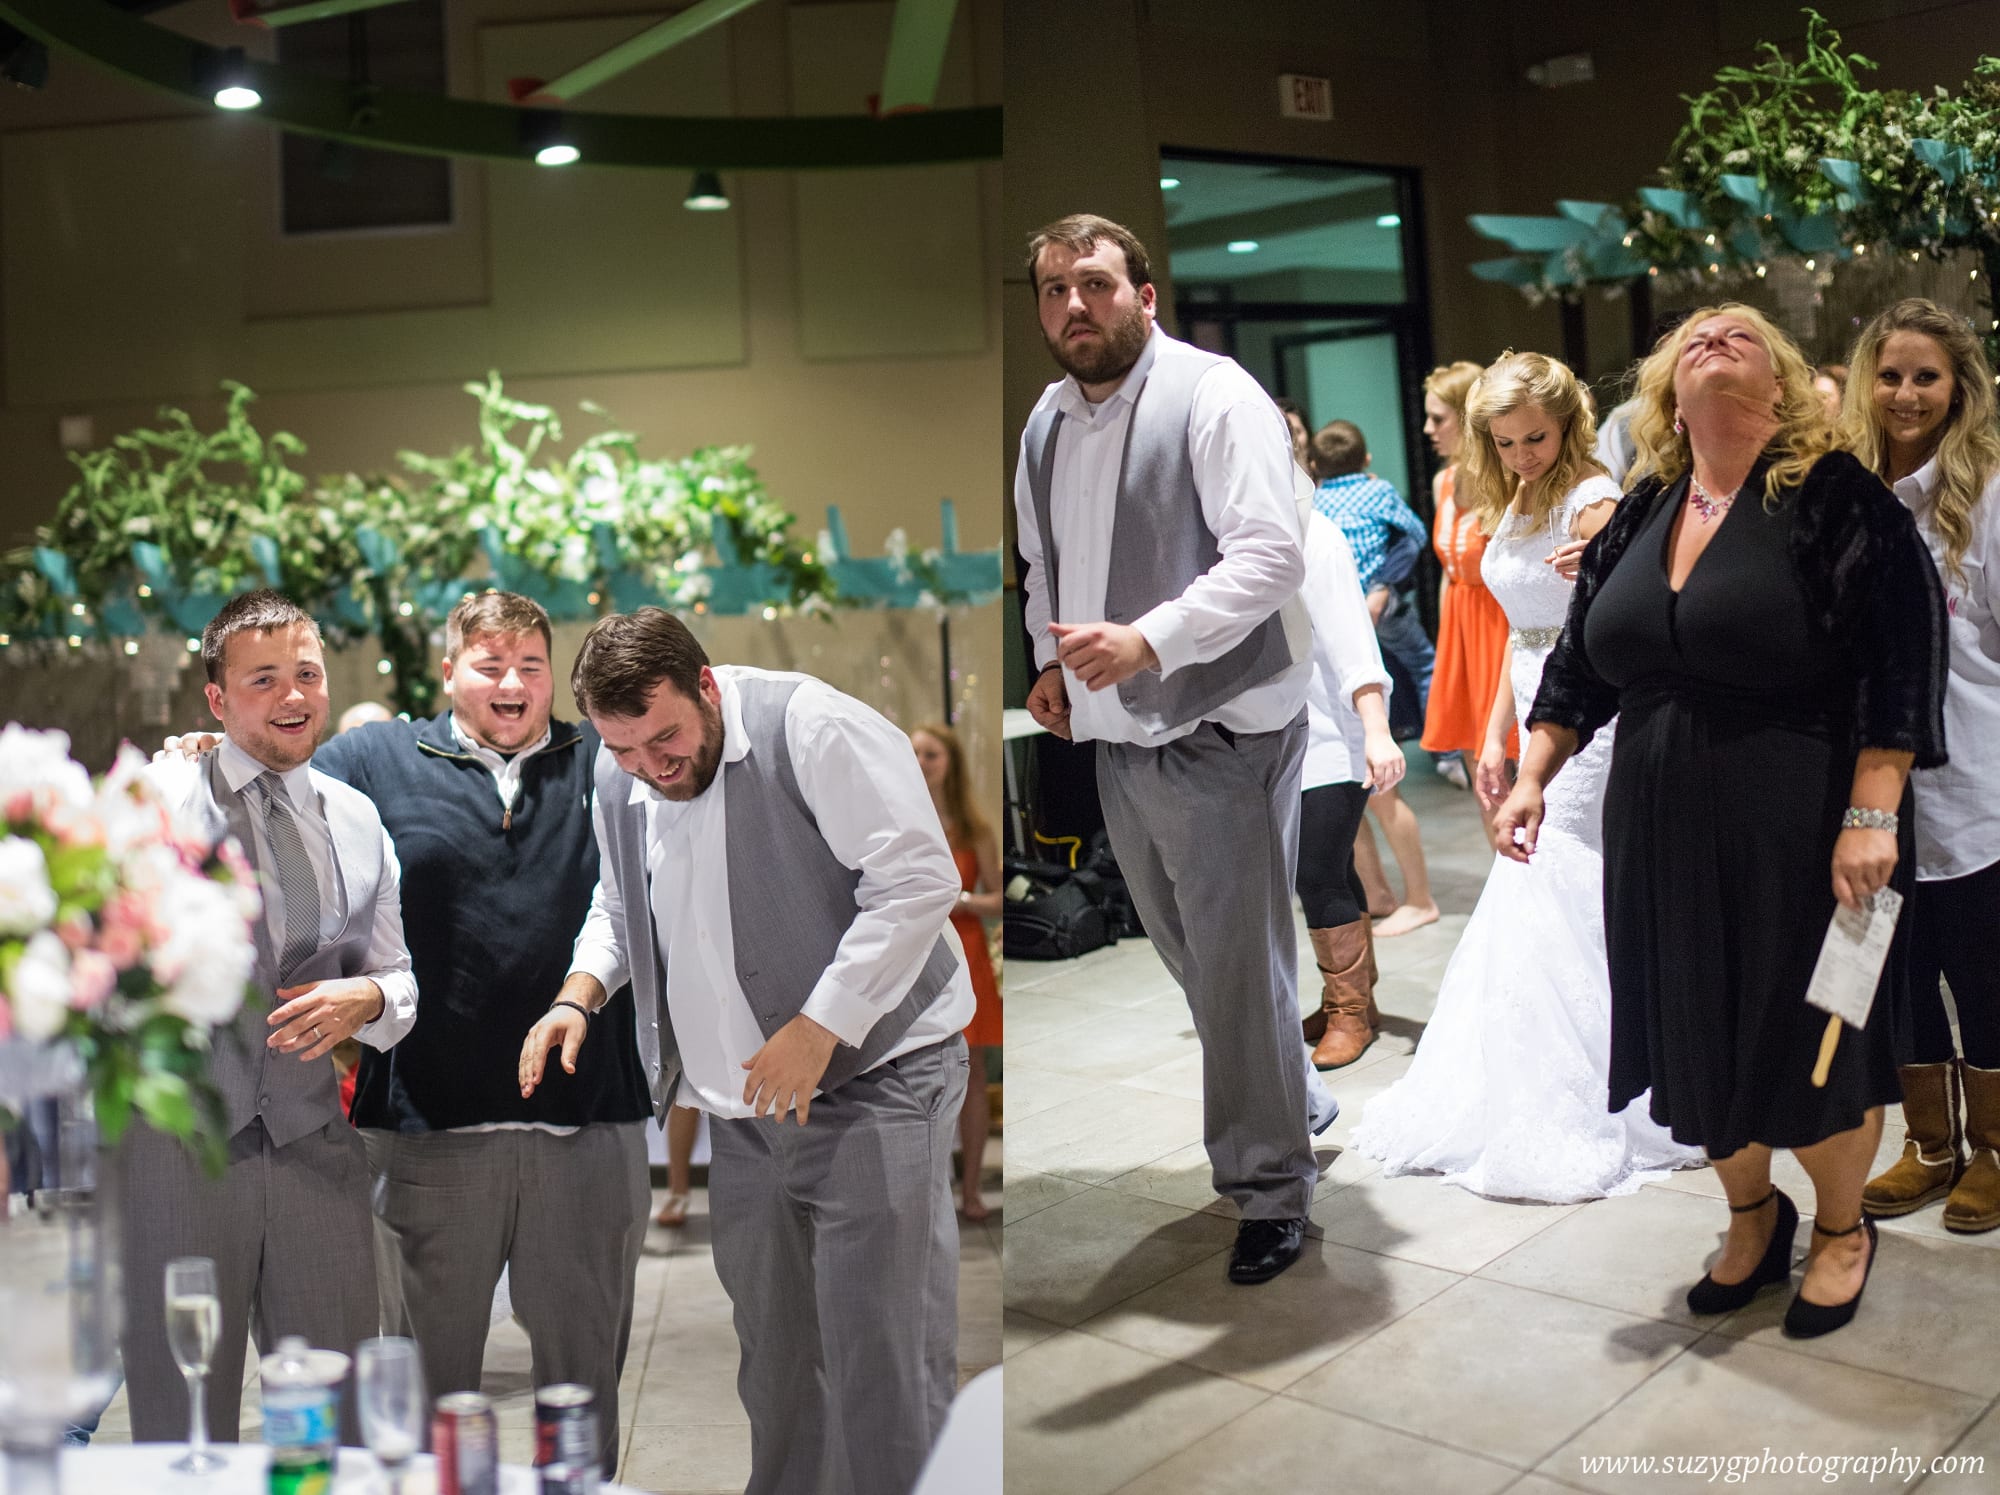 vows by victoria-lake charles-wedding-photography-suzy g-photography-suzygphotography_0093